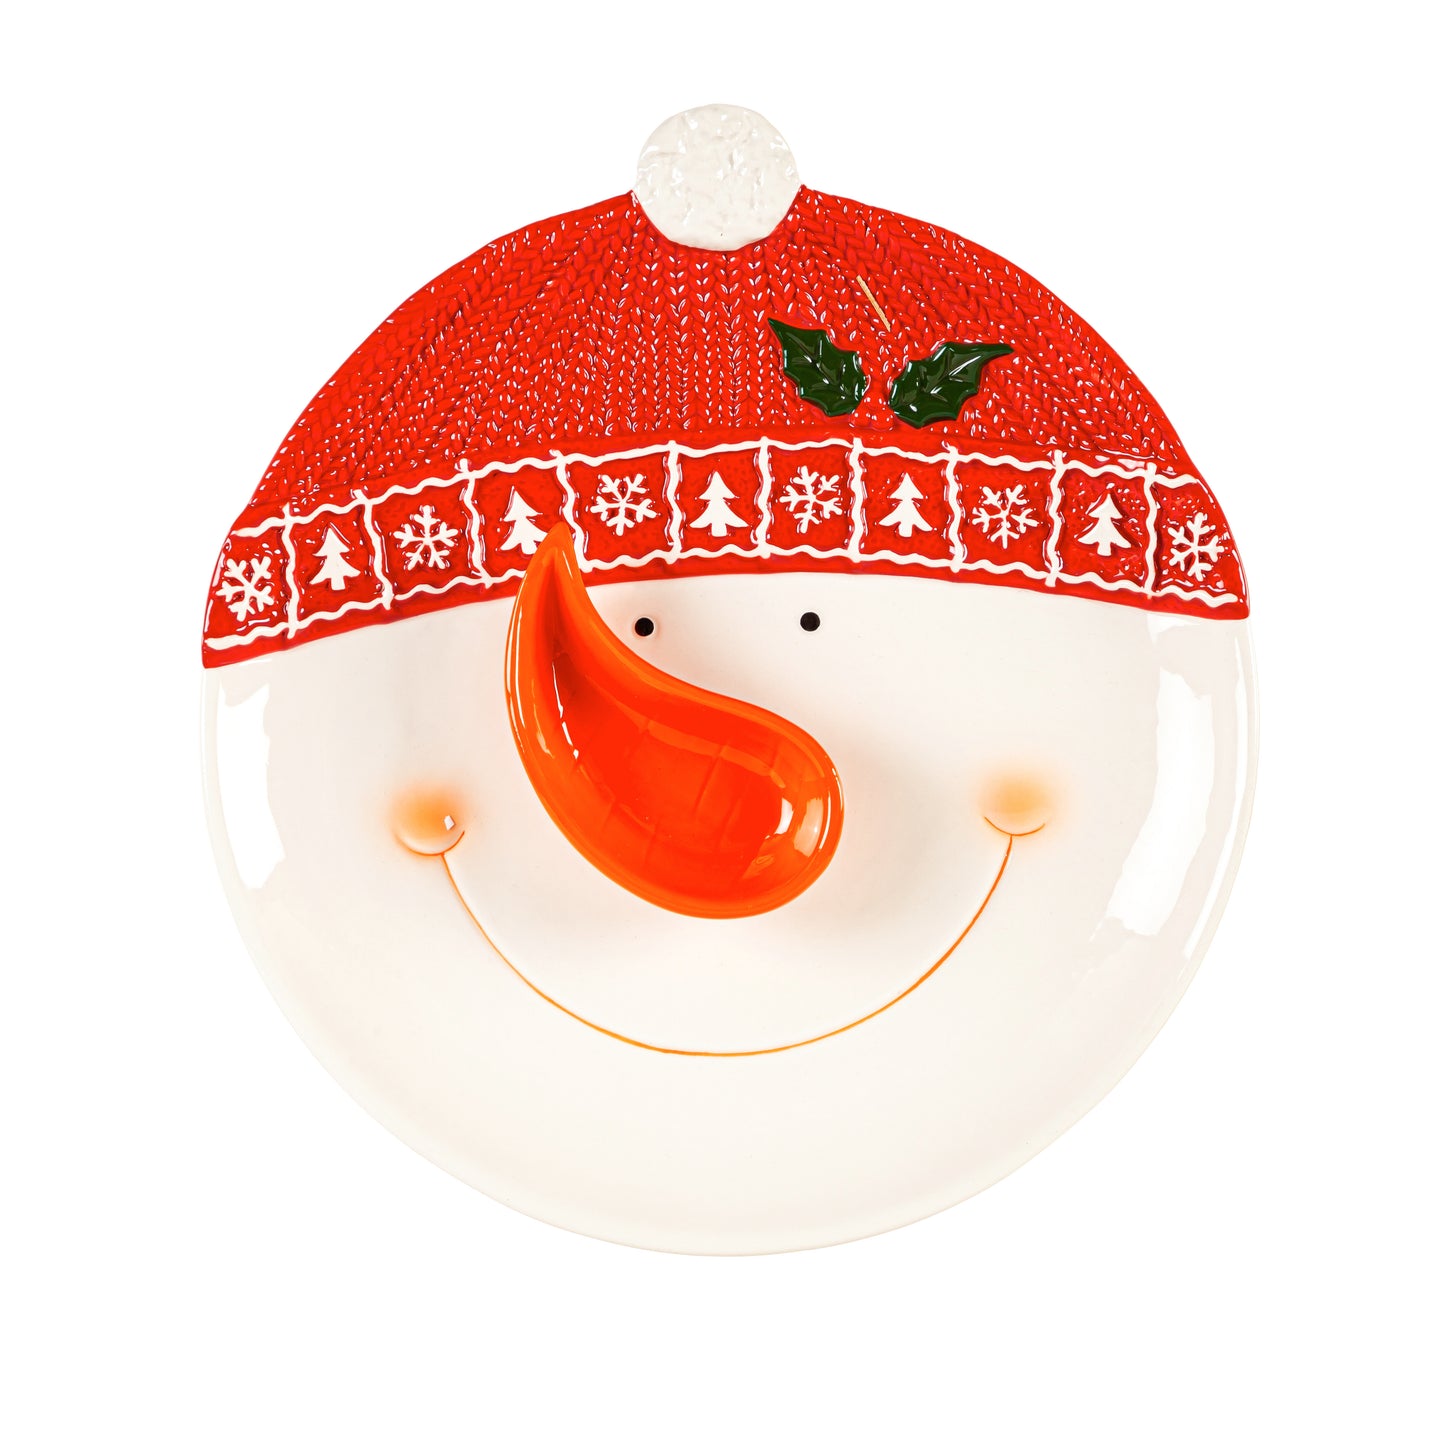 Snowman Ceramic Serving Plate, 10" with Removeable Dip Bowl Set